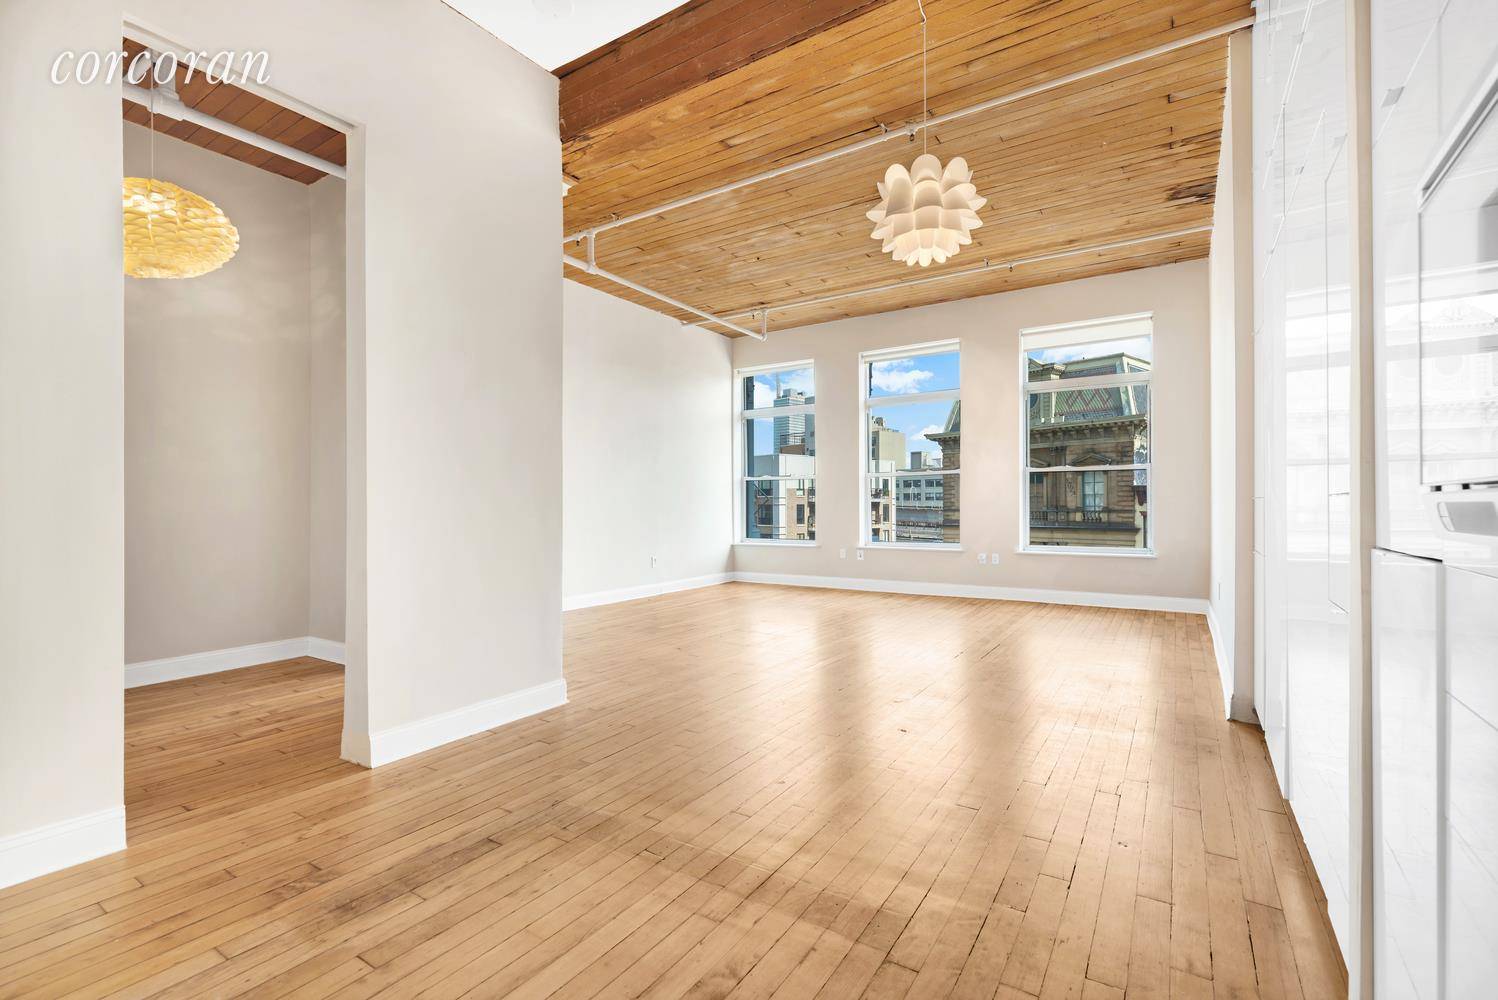 LEASES OUT NO LONGER SHOWING Bask in stunning views and grand proportions in this gorgeous loft home in a rare Williamsburg cast iron building.